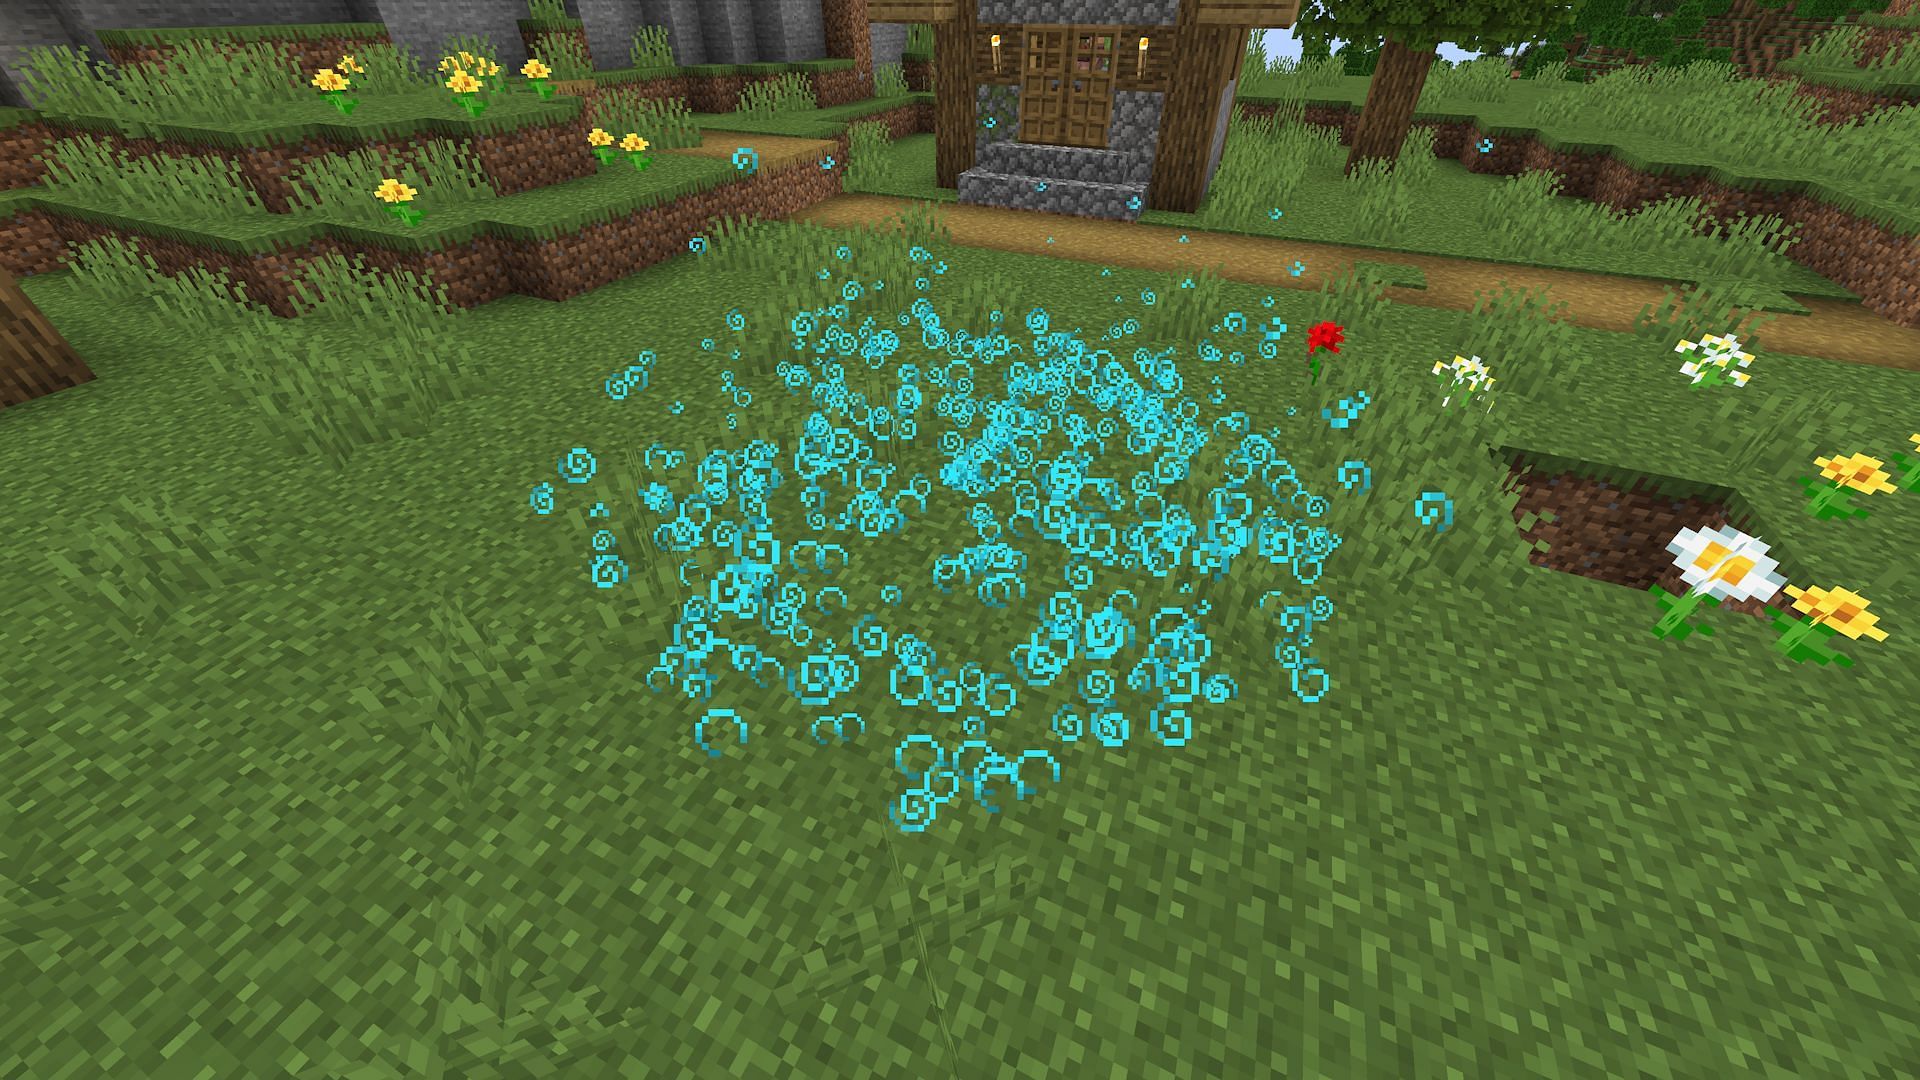 A lingering potion effect on the ground (Image via Mojang)